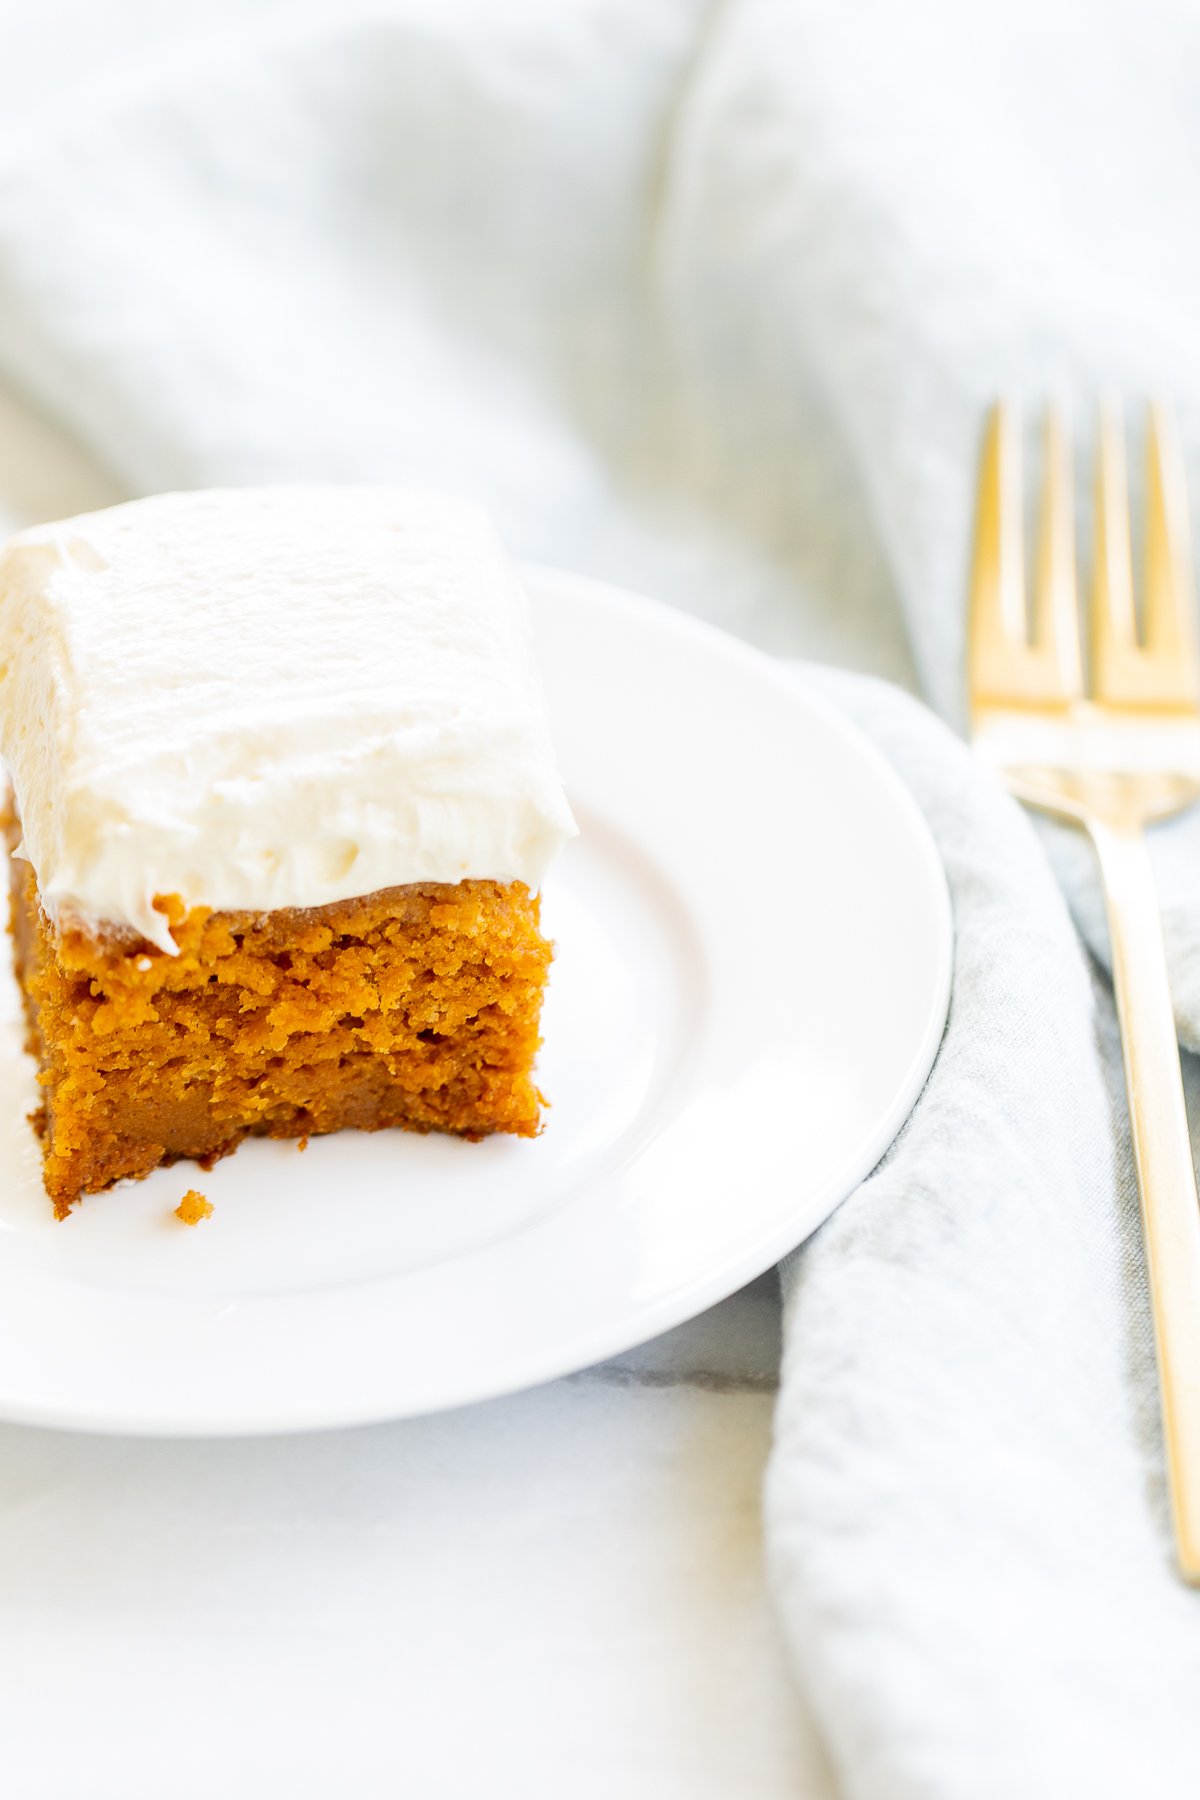 A slice of pumpkin cake with fluffy cream cheese frosting on a plate.